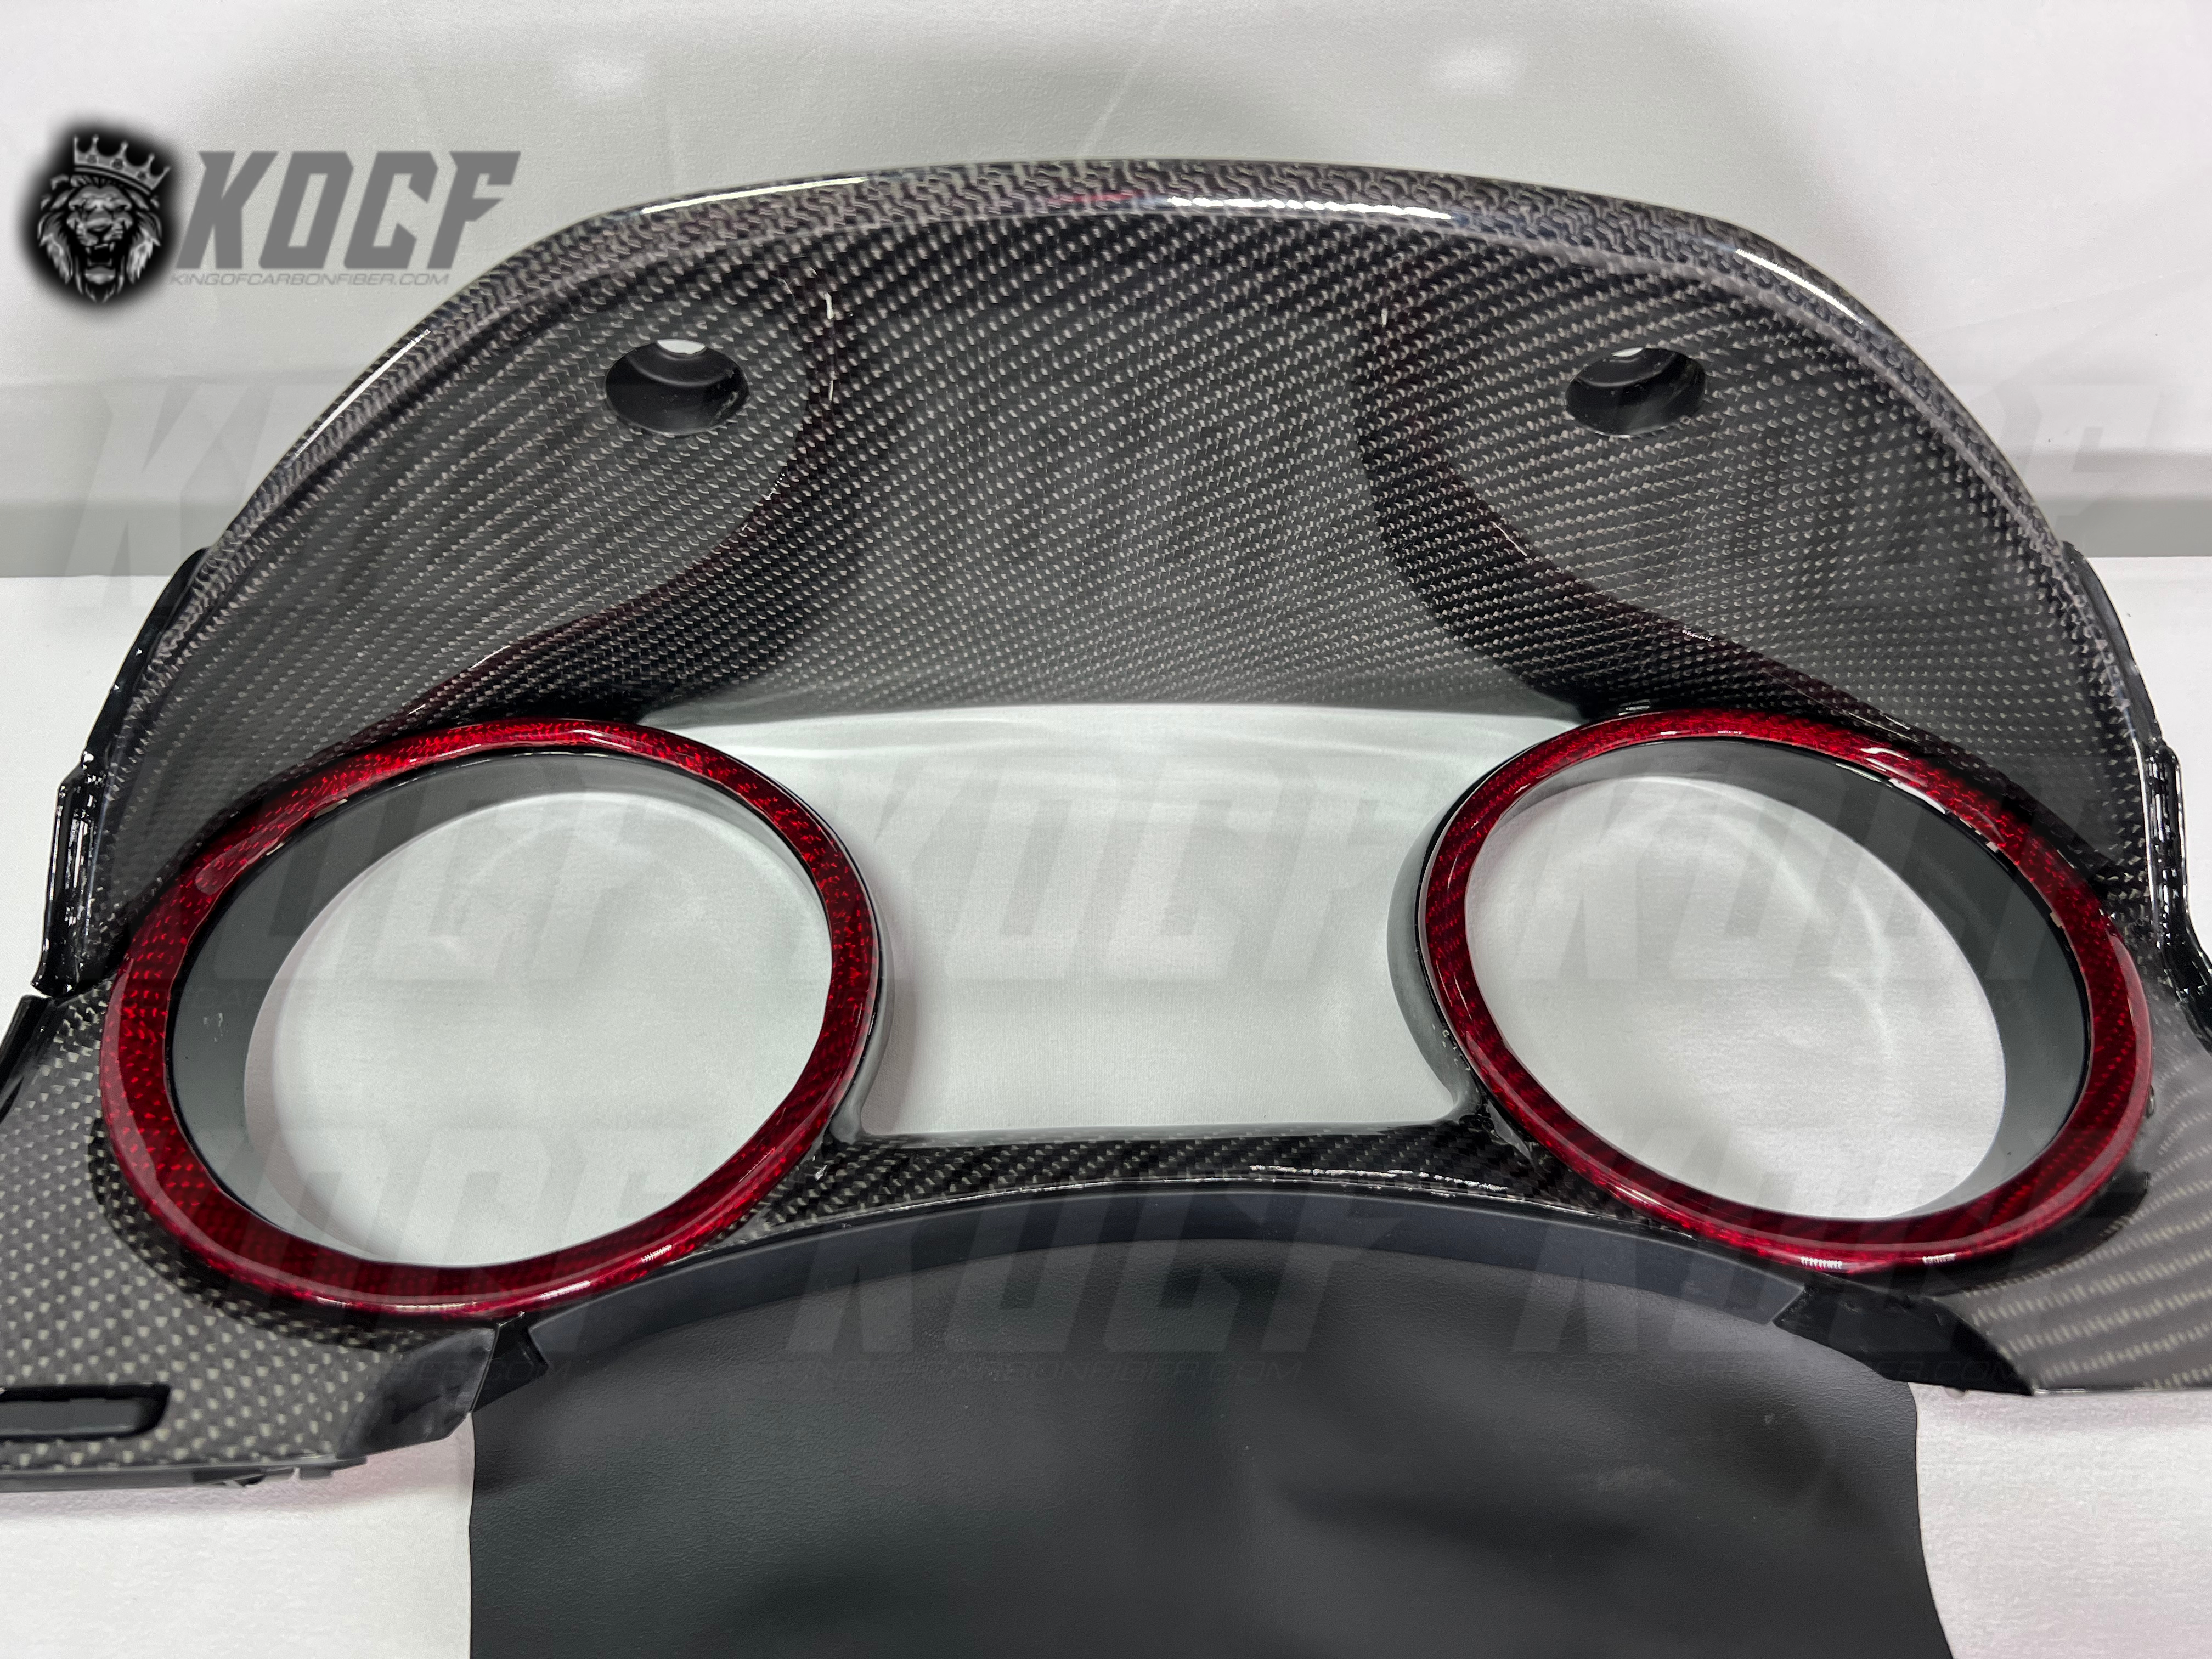 Camry Dashboard Cover | Camry Speedometer Cover | King Of Carbon Fibre